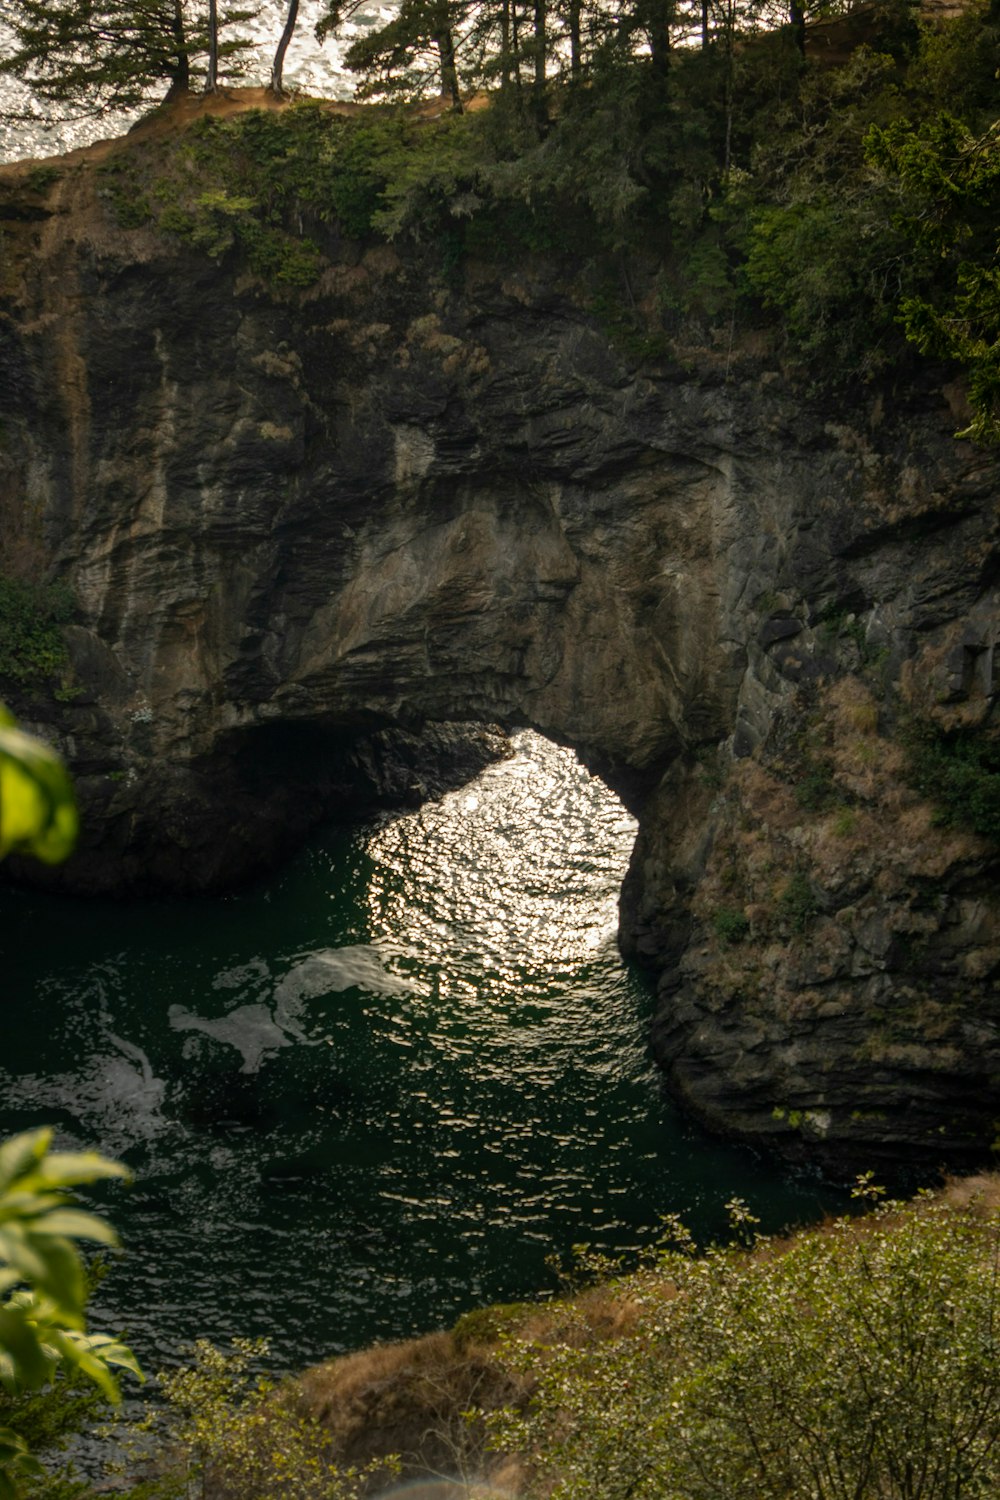 a large rock arch over a body of water